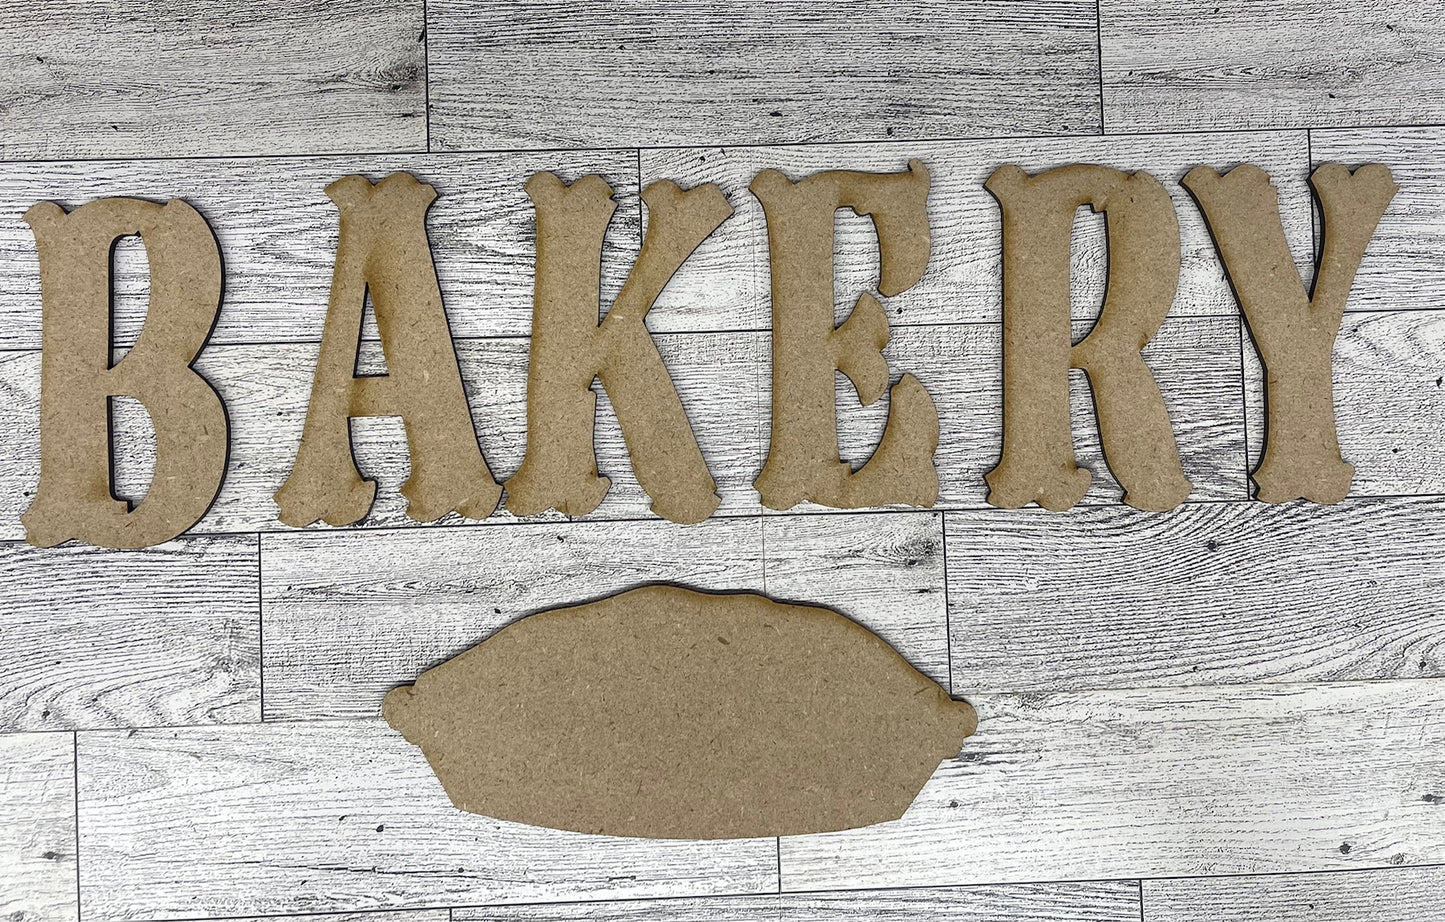 Fresh Baked Bakery sign pieces - Unfinished wooden cutout pieces,